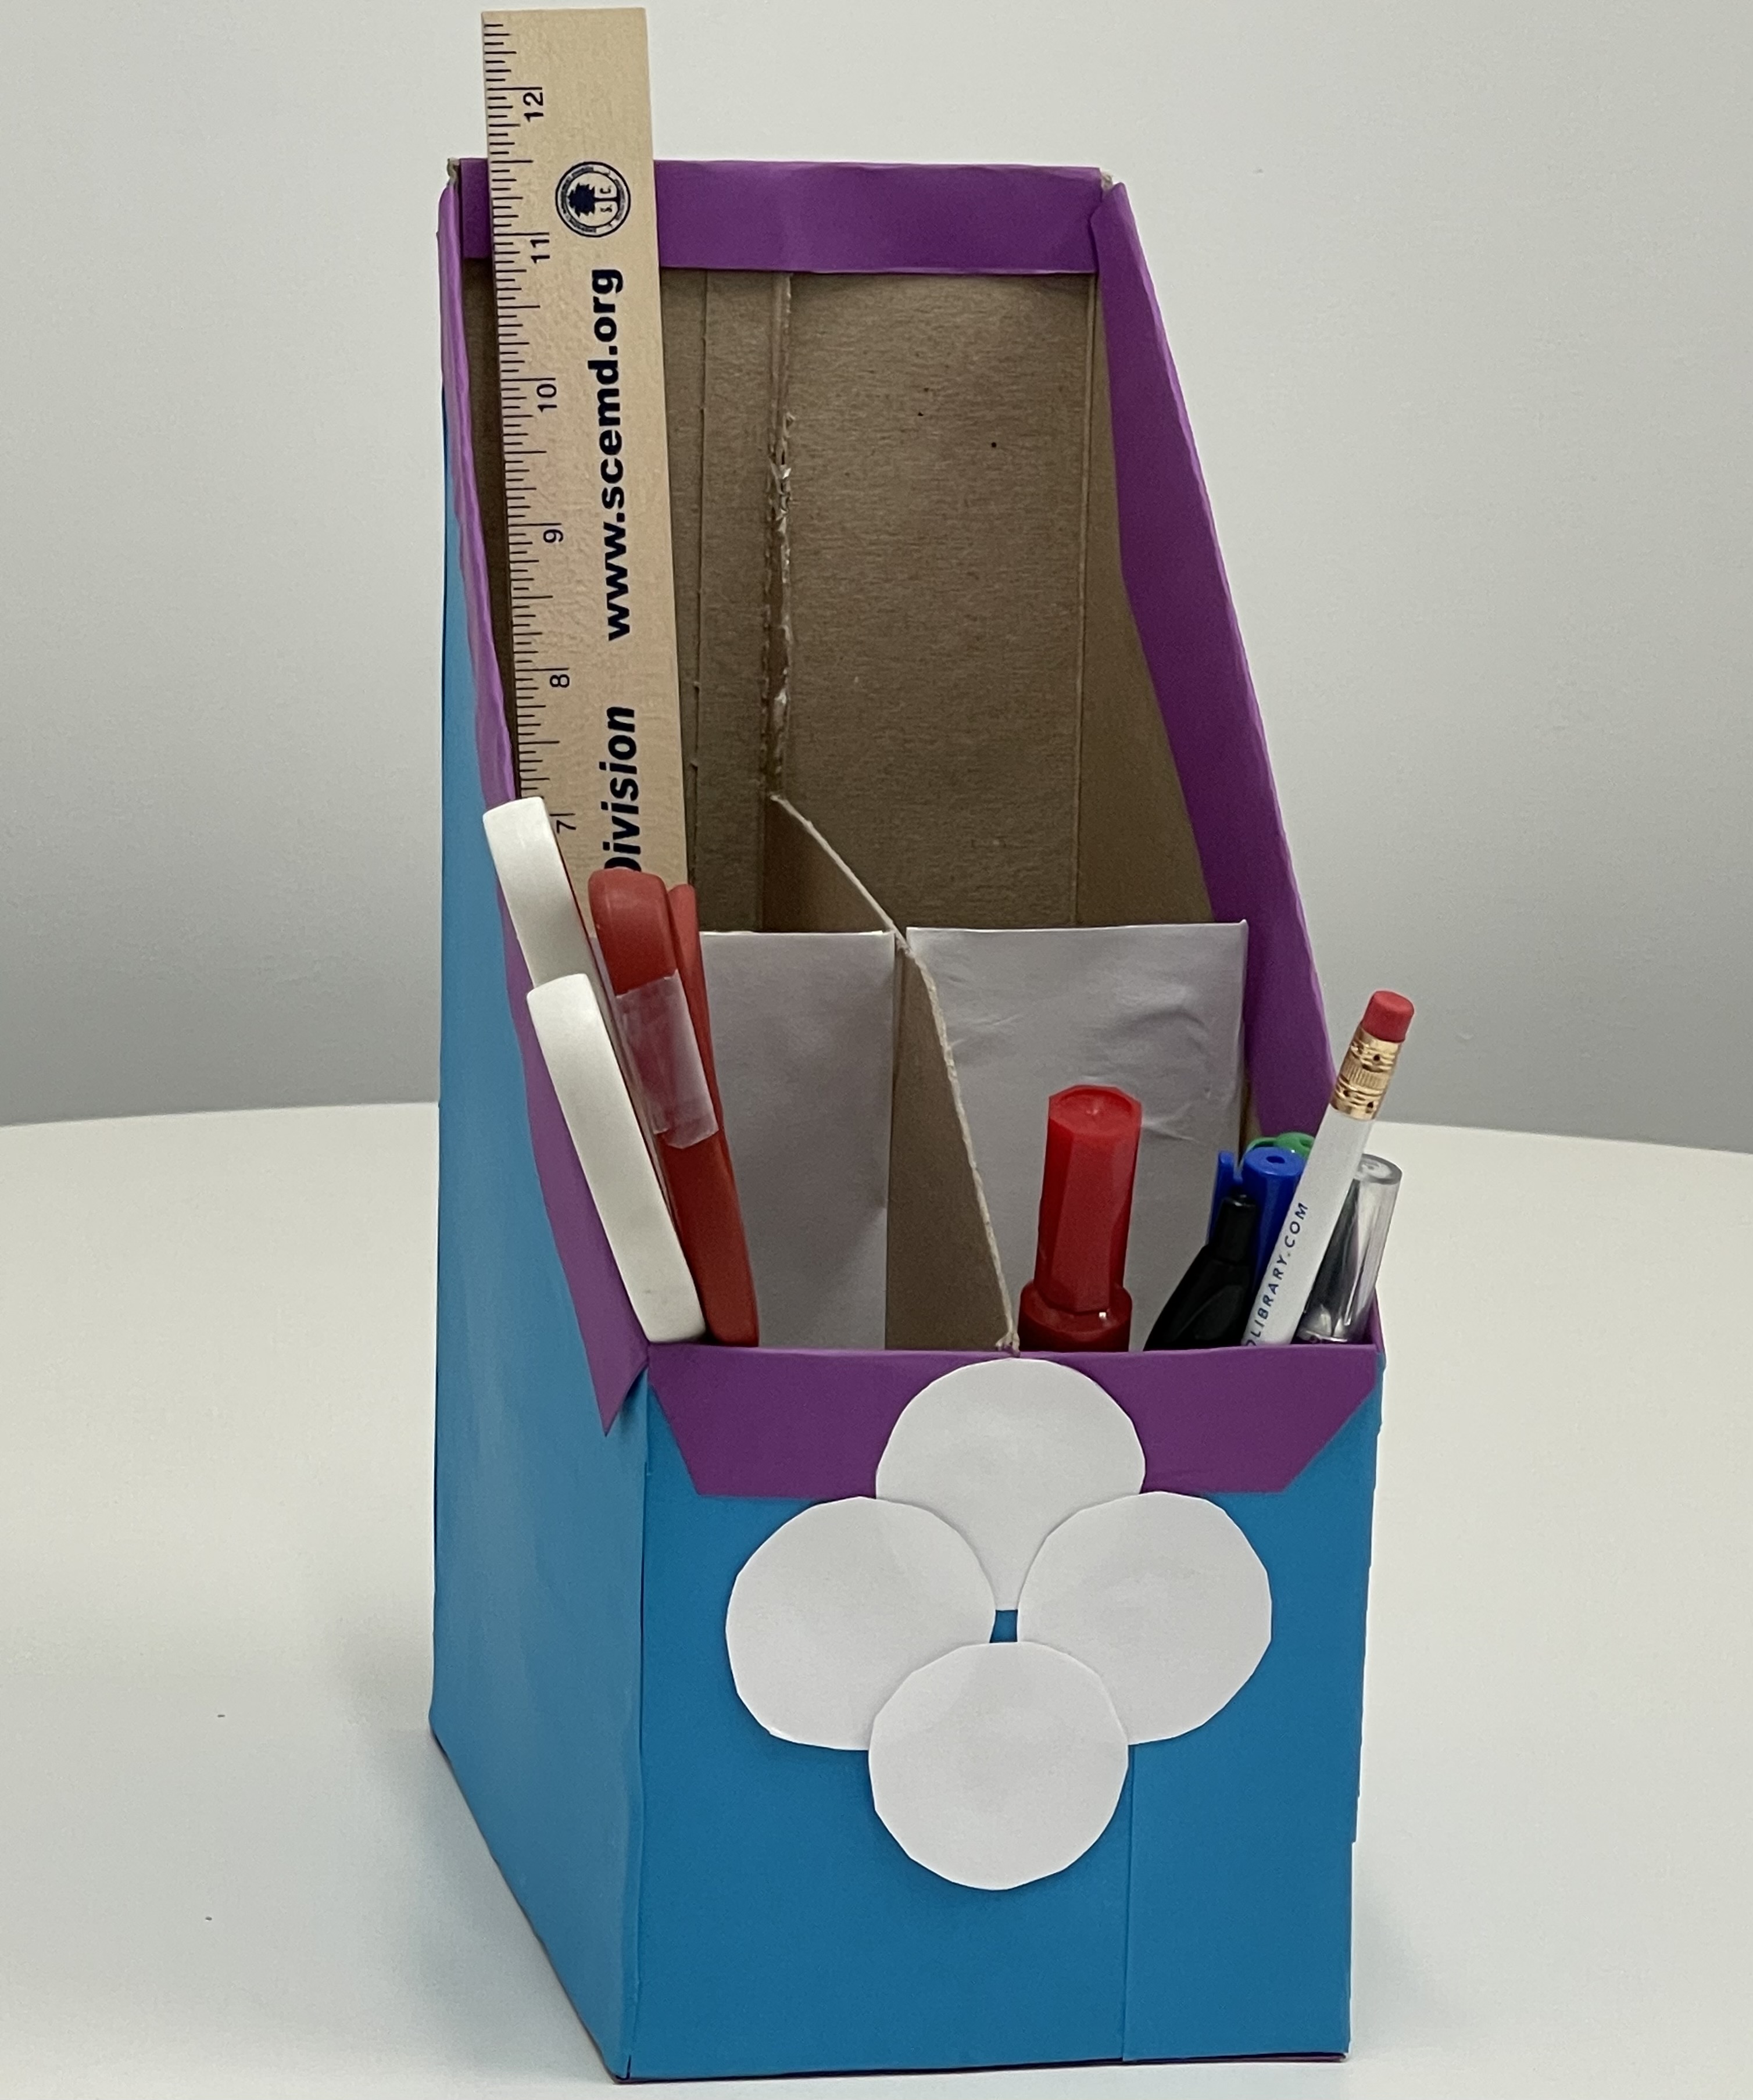 white, purple, and blue desk organizer made out of cardboard; red & red/white handled scissors, red and green markers, white pencil